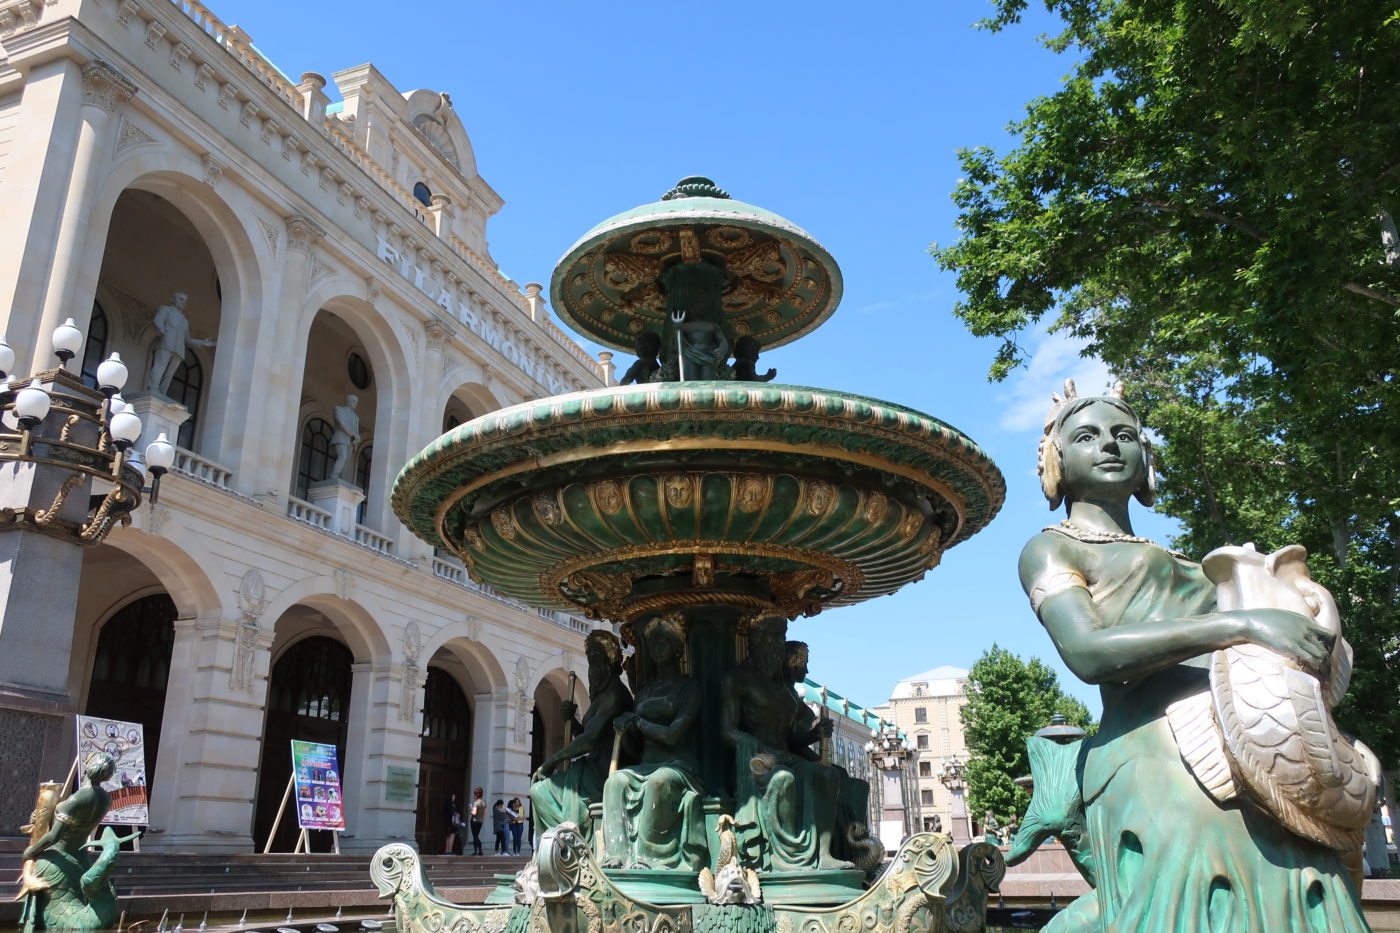 One of the fountains outside the Ganja Philharmonic theatre